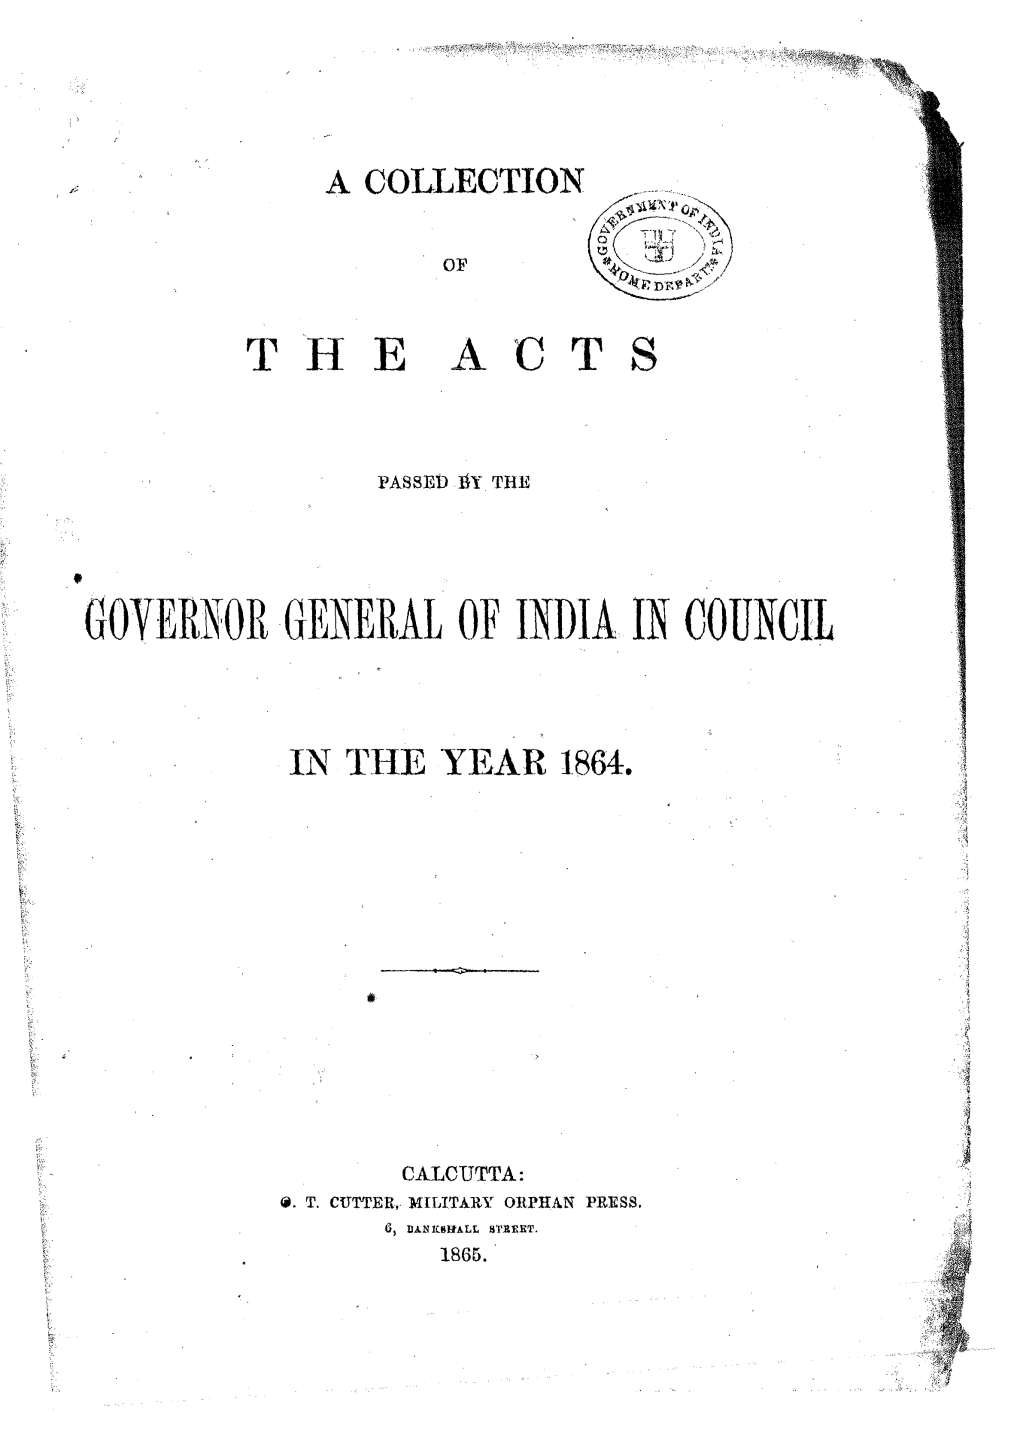 Governor General of India in Council